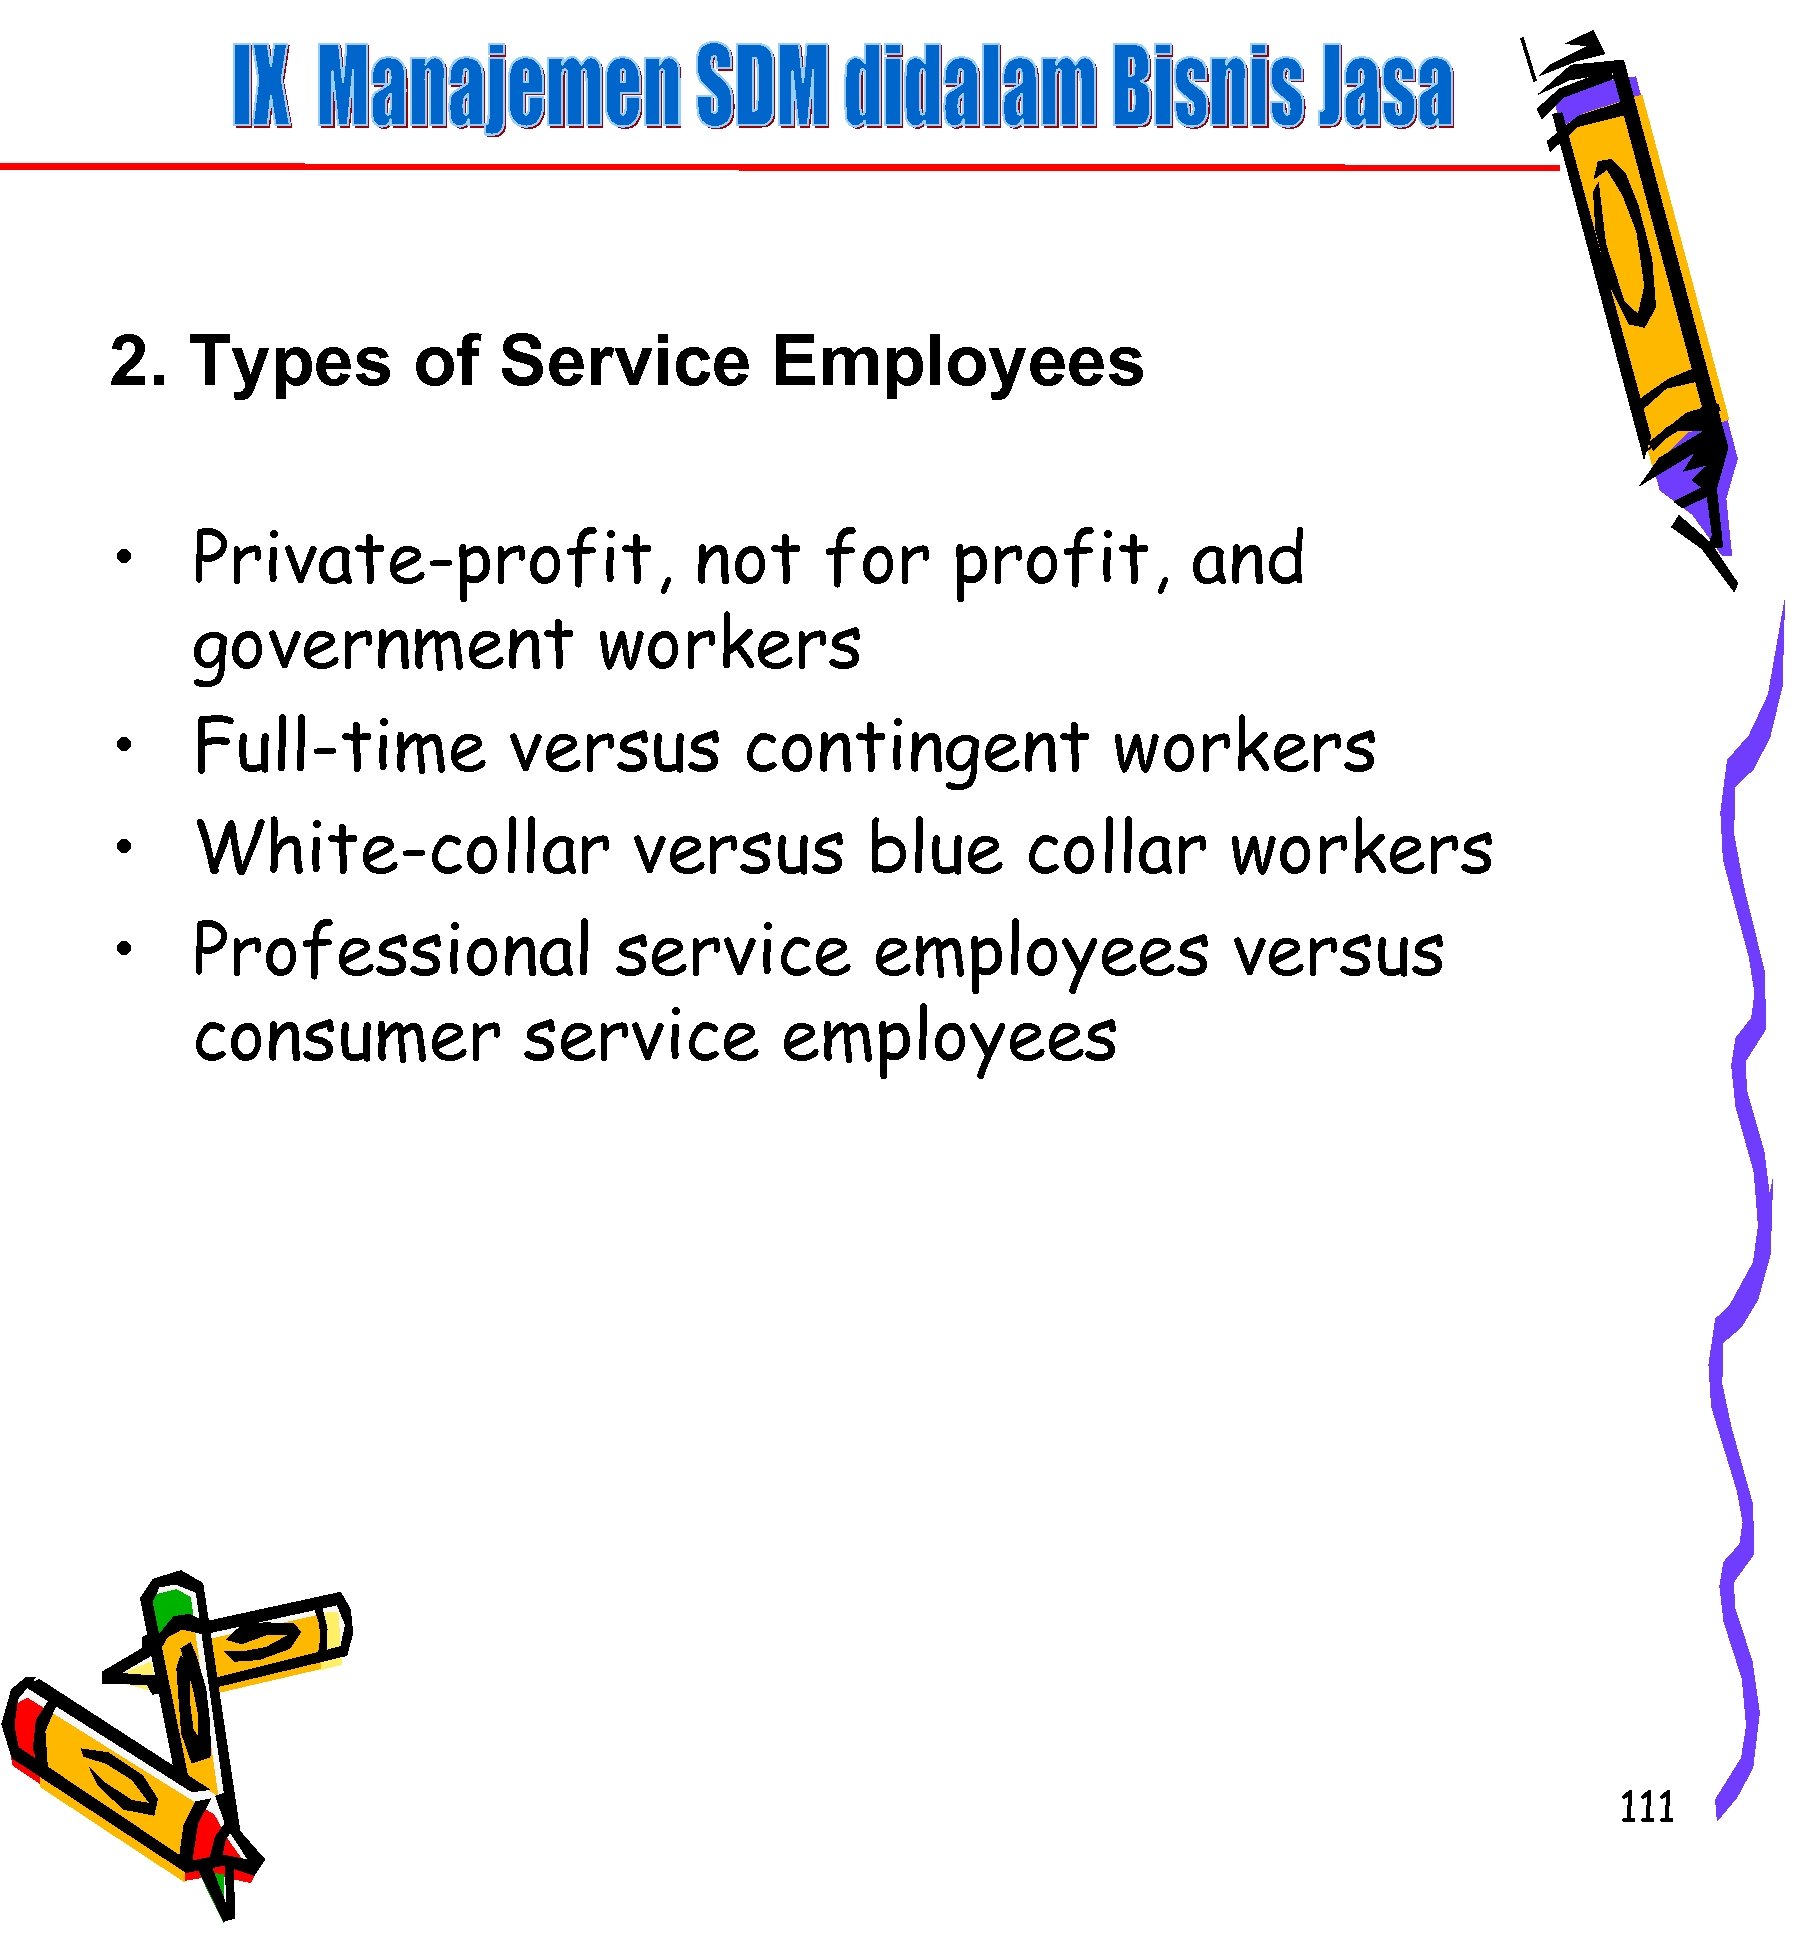 2. Types of Service Employees • Private-profit, not for profit, and government workers •